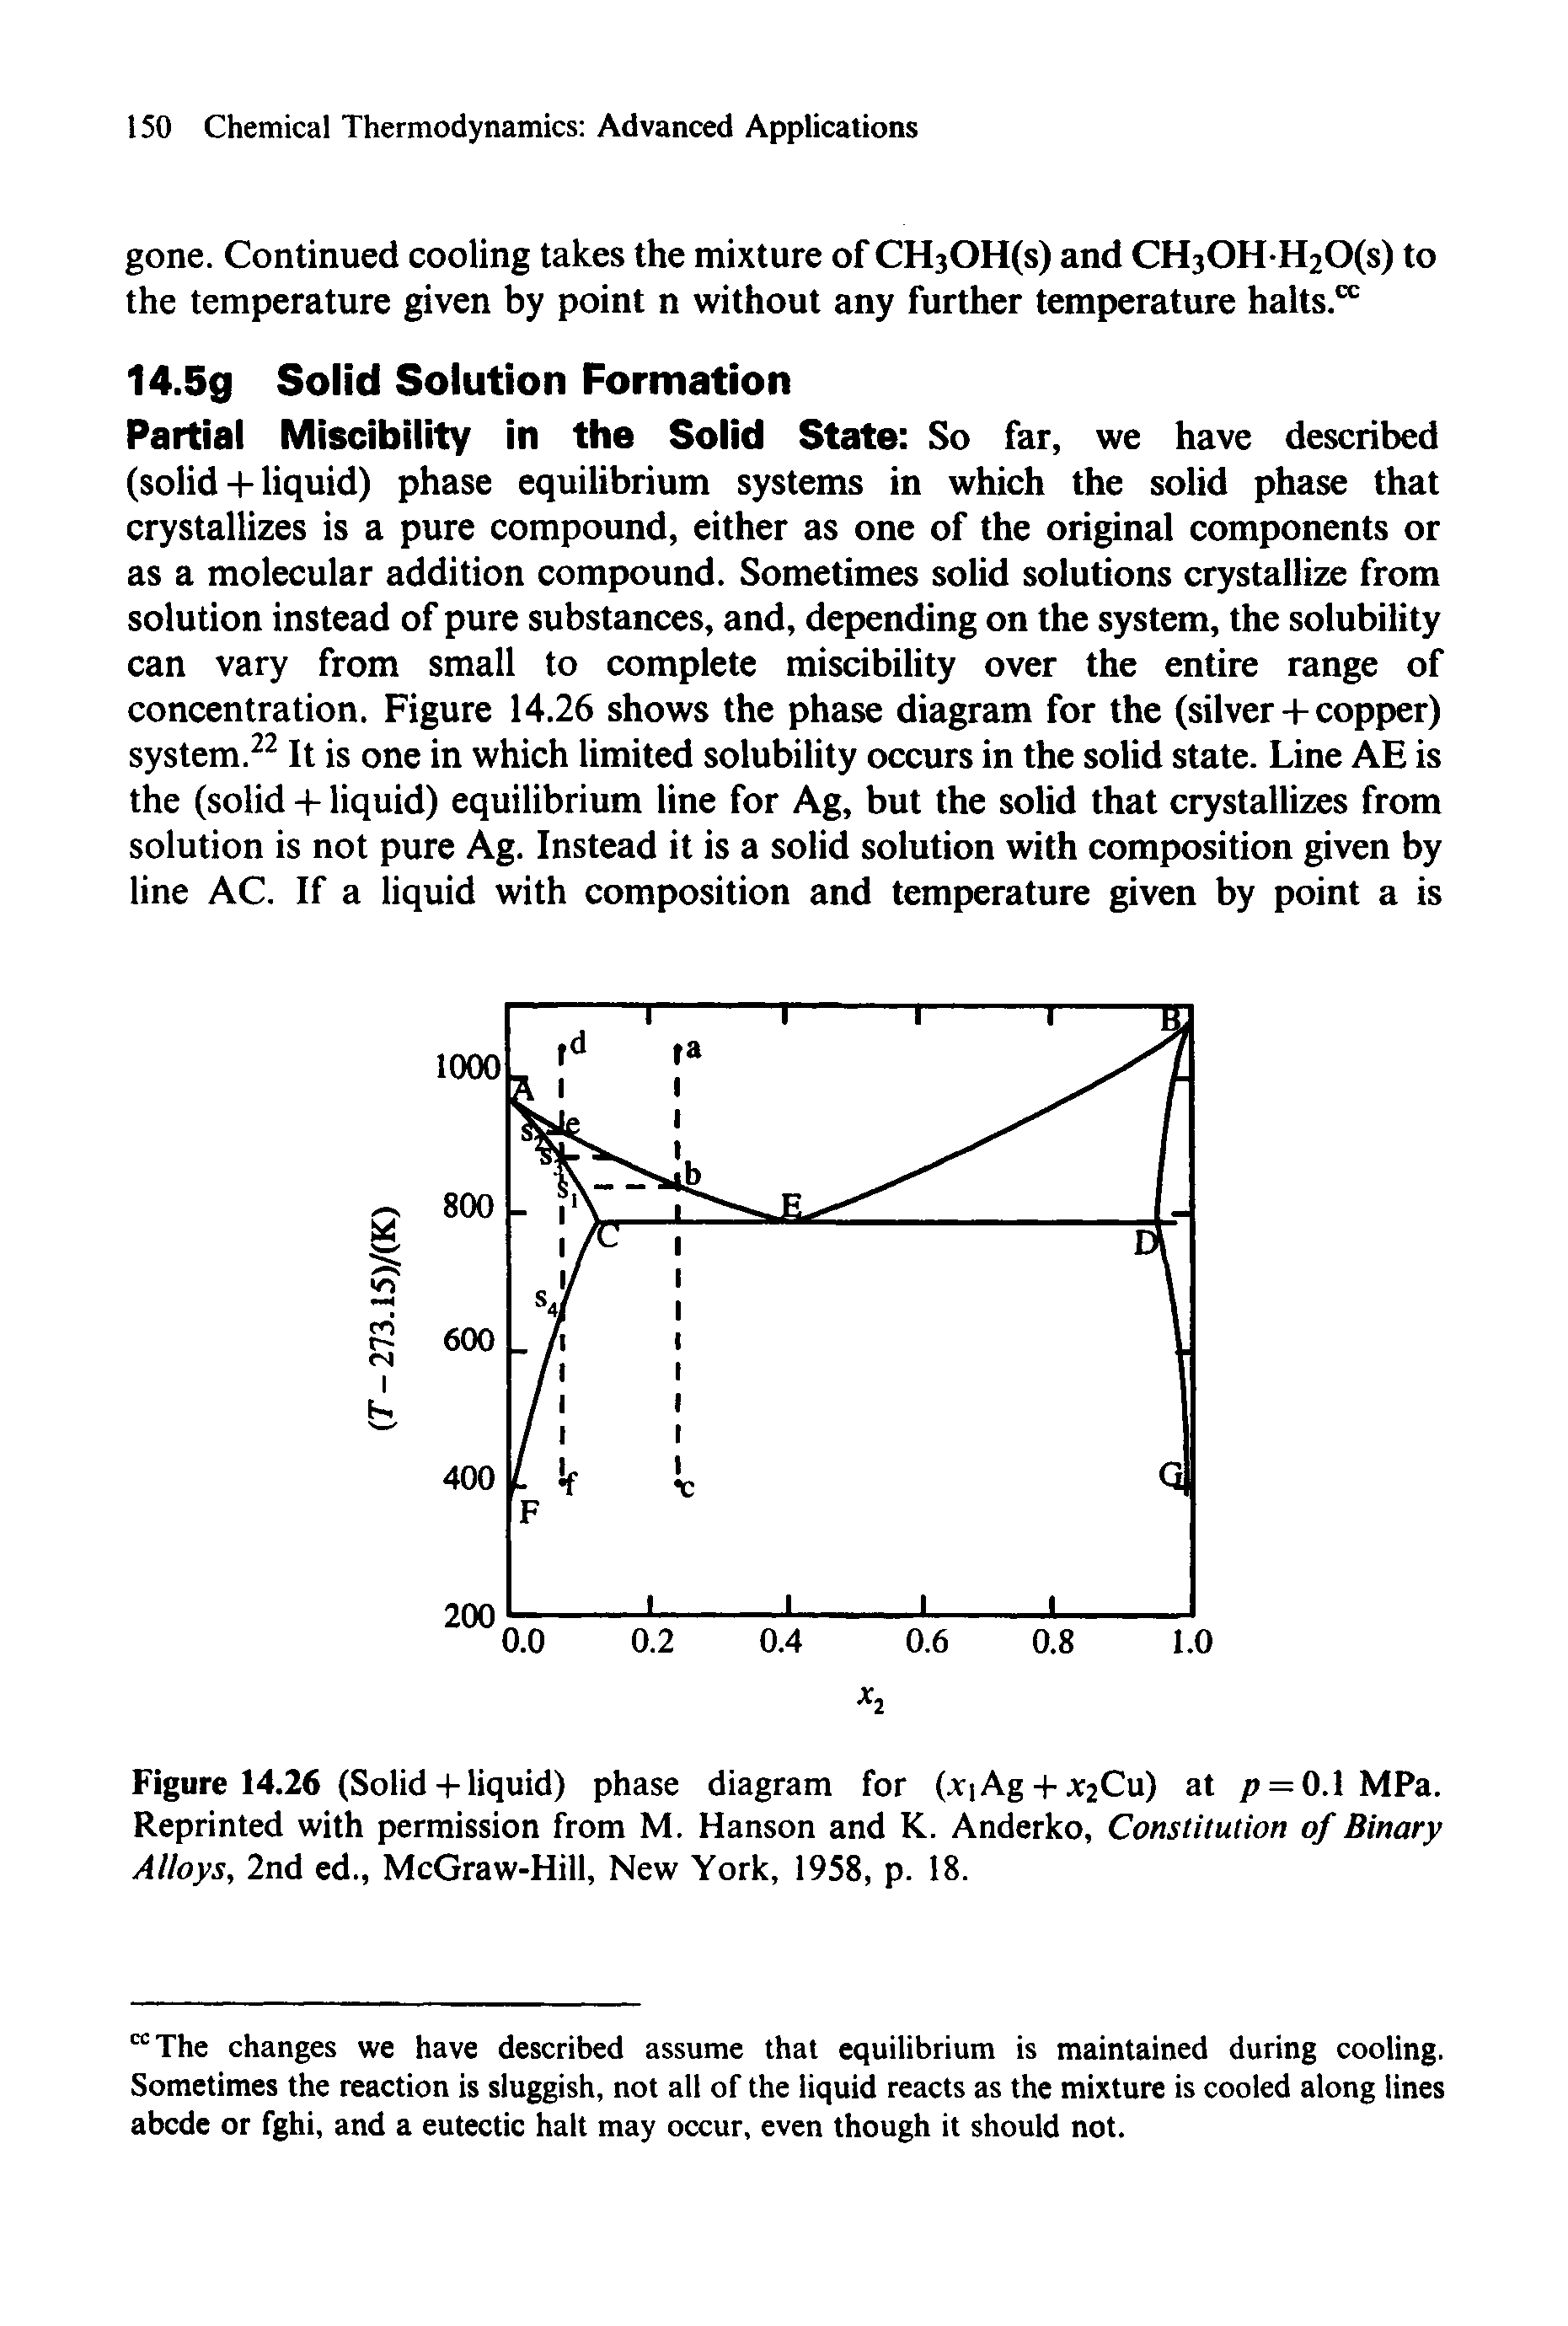 Figure 14.26 (Solid + liquid) phase diagram for (xjAg + Cu) at p — 0.1 MPa. Reprinted with permission from M. Hanson and K. Anderko, Constitution of Binary Alloys, 2nd ed., McGraw-Hill, New York, 1958, p. 18.